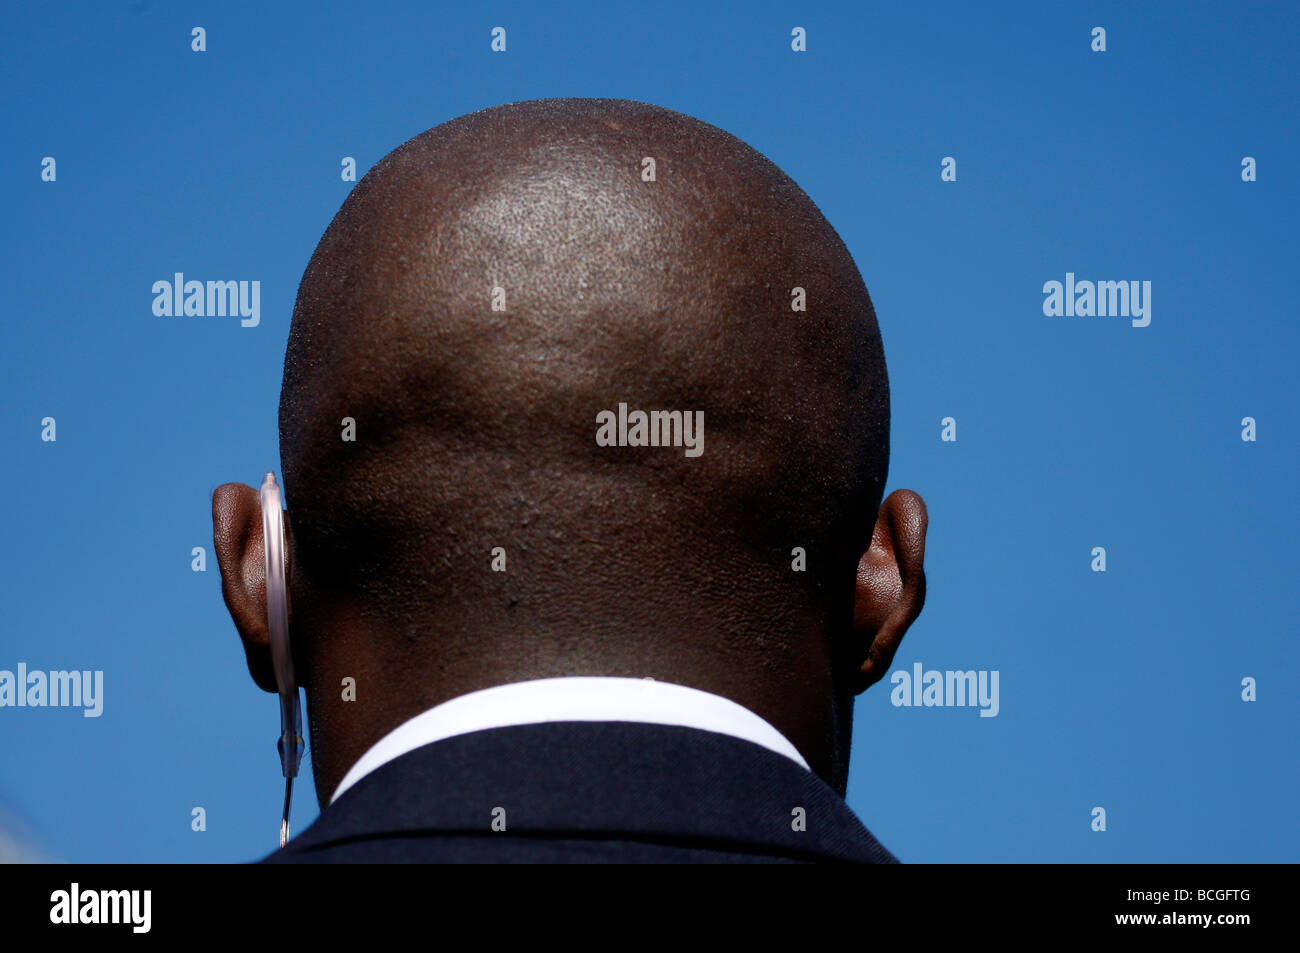 Back of the bald head of a black security guard against a clear blue sky Stock Photo